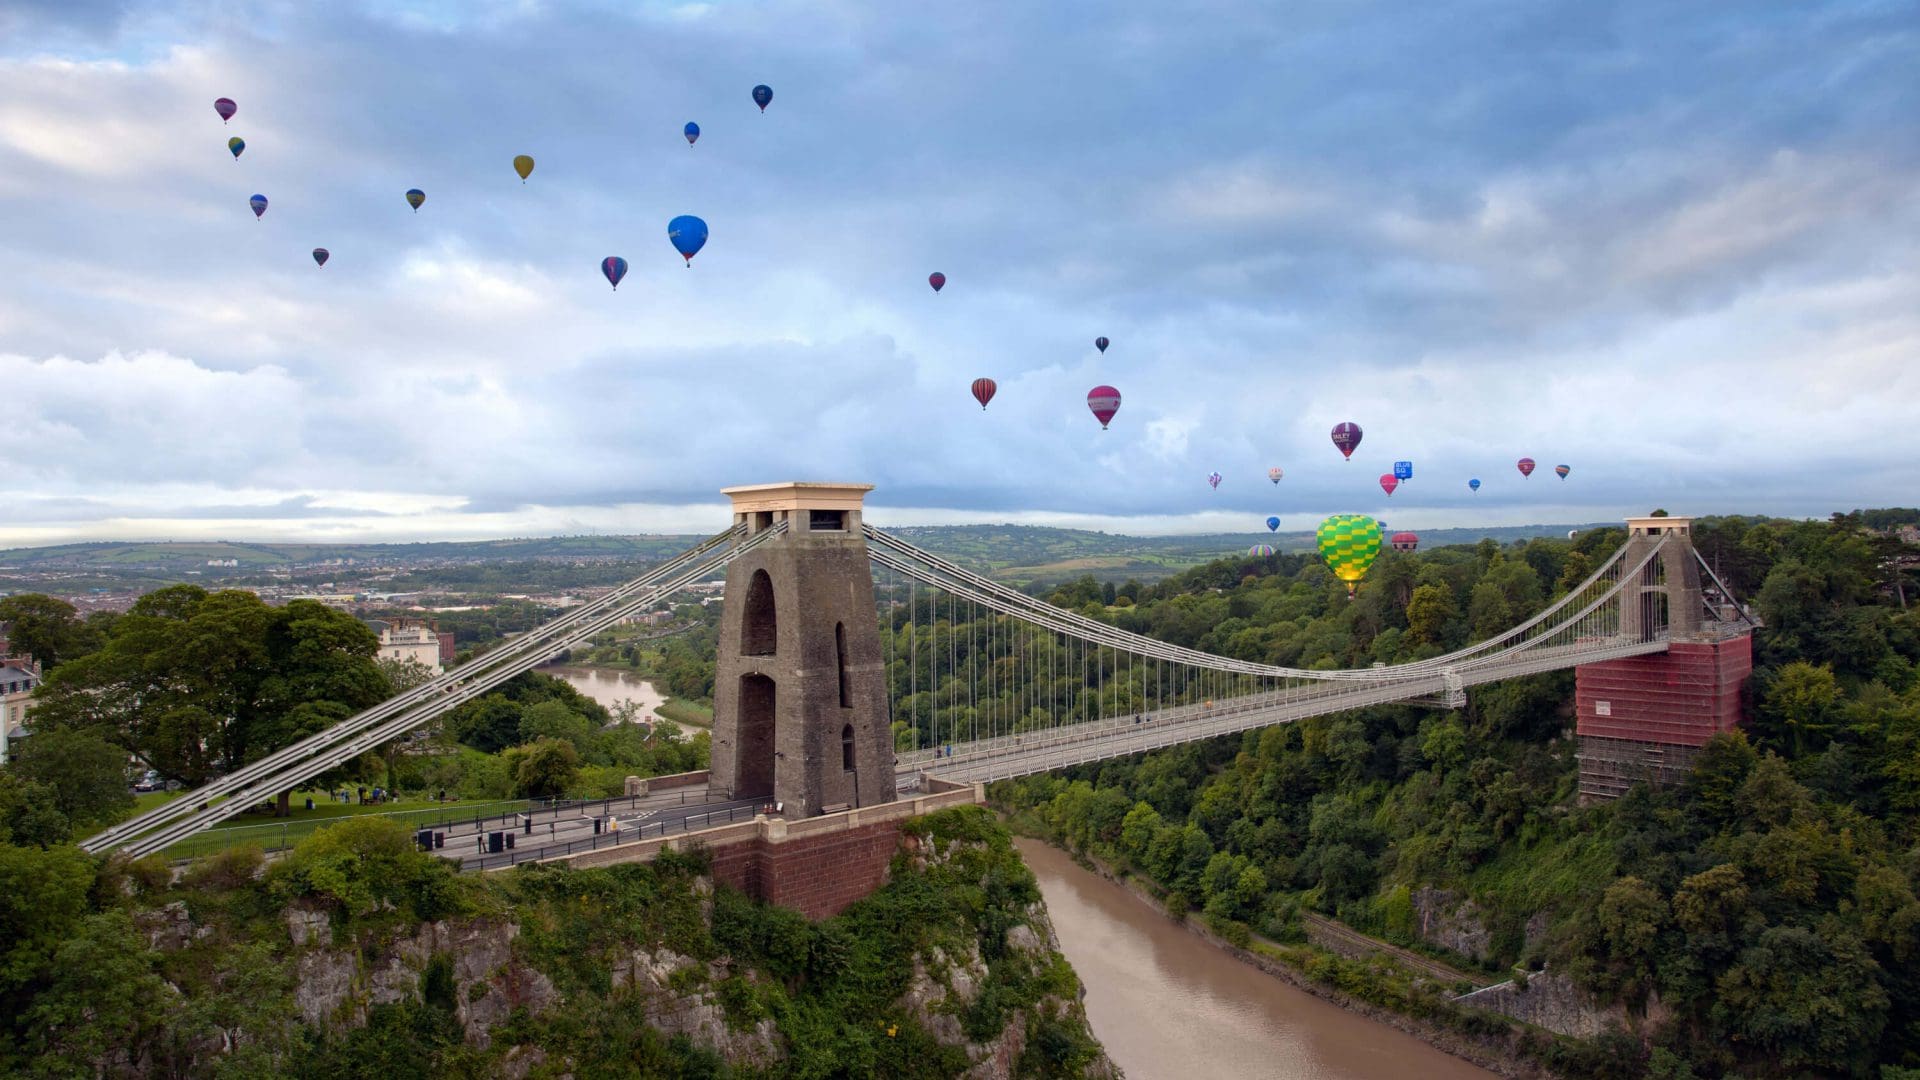 's Clifton Suspension Bridge is surrounded in the sky by colourful hot air-balloons